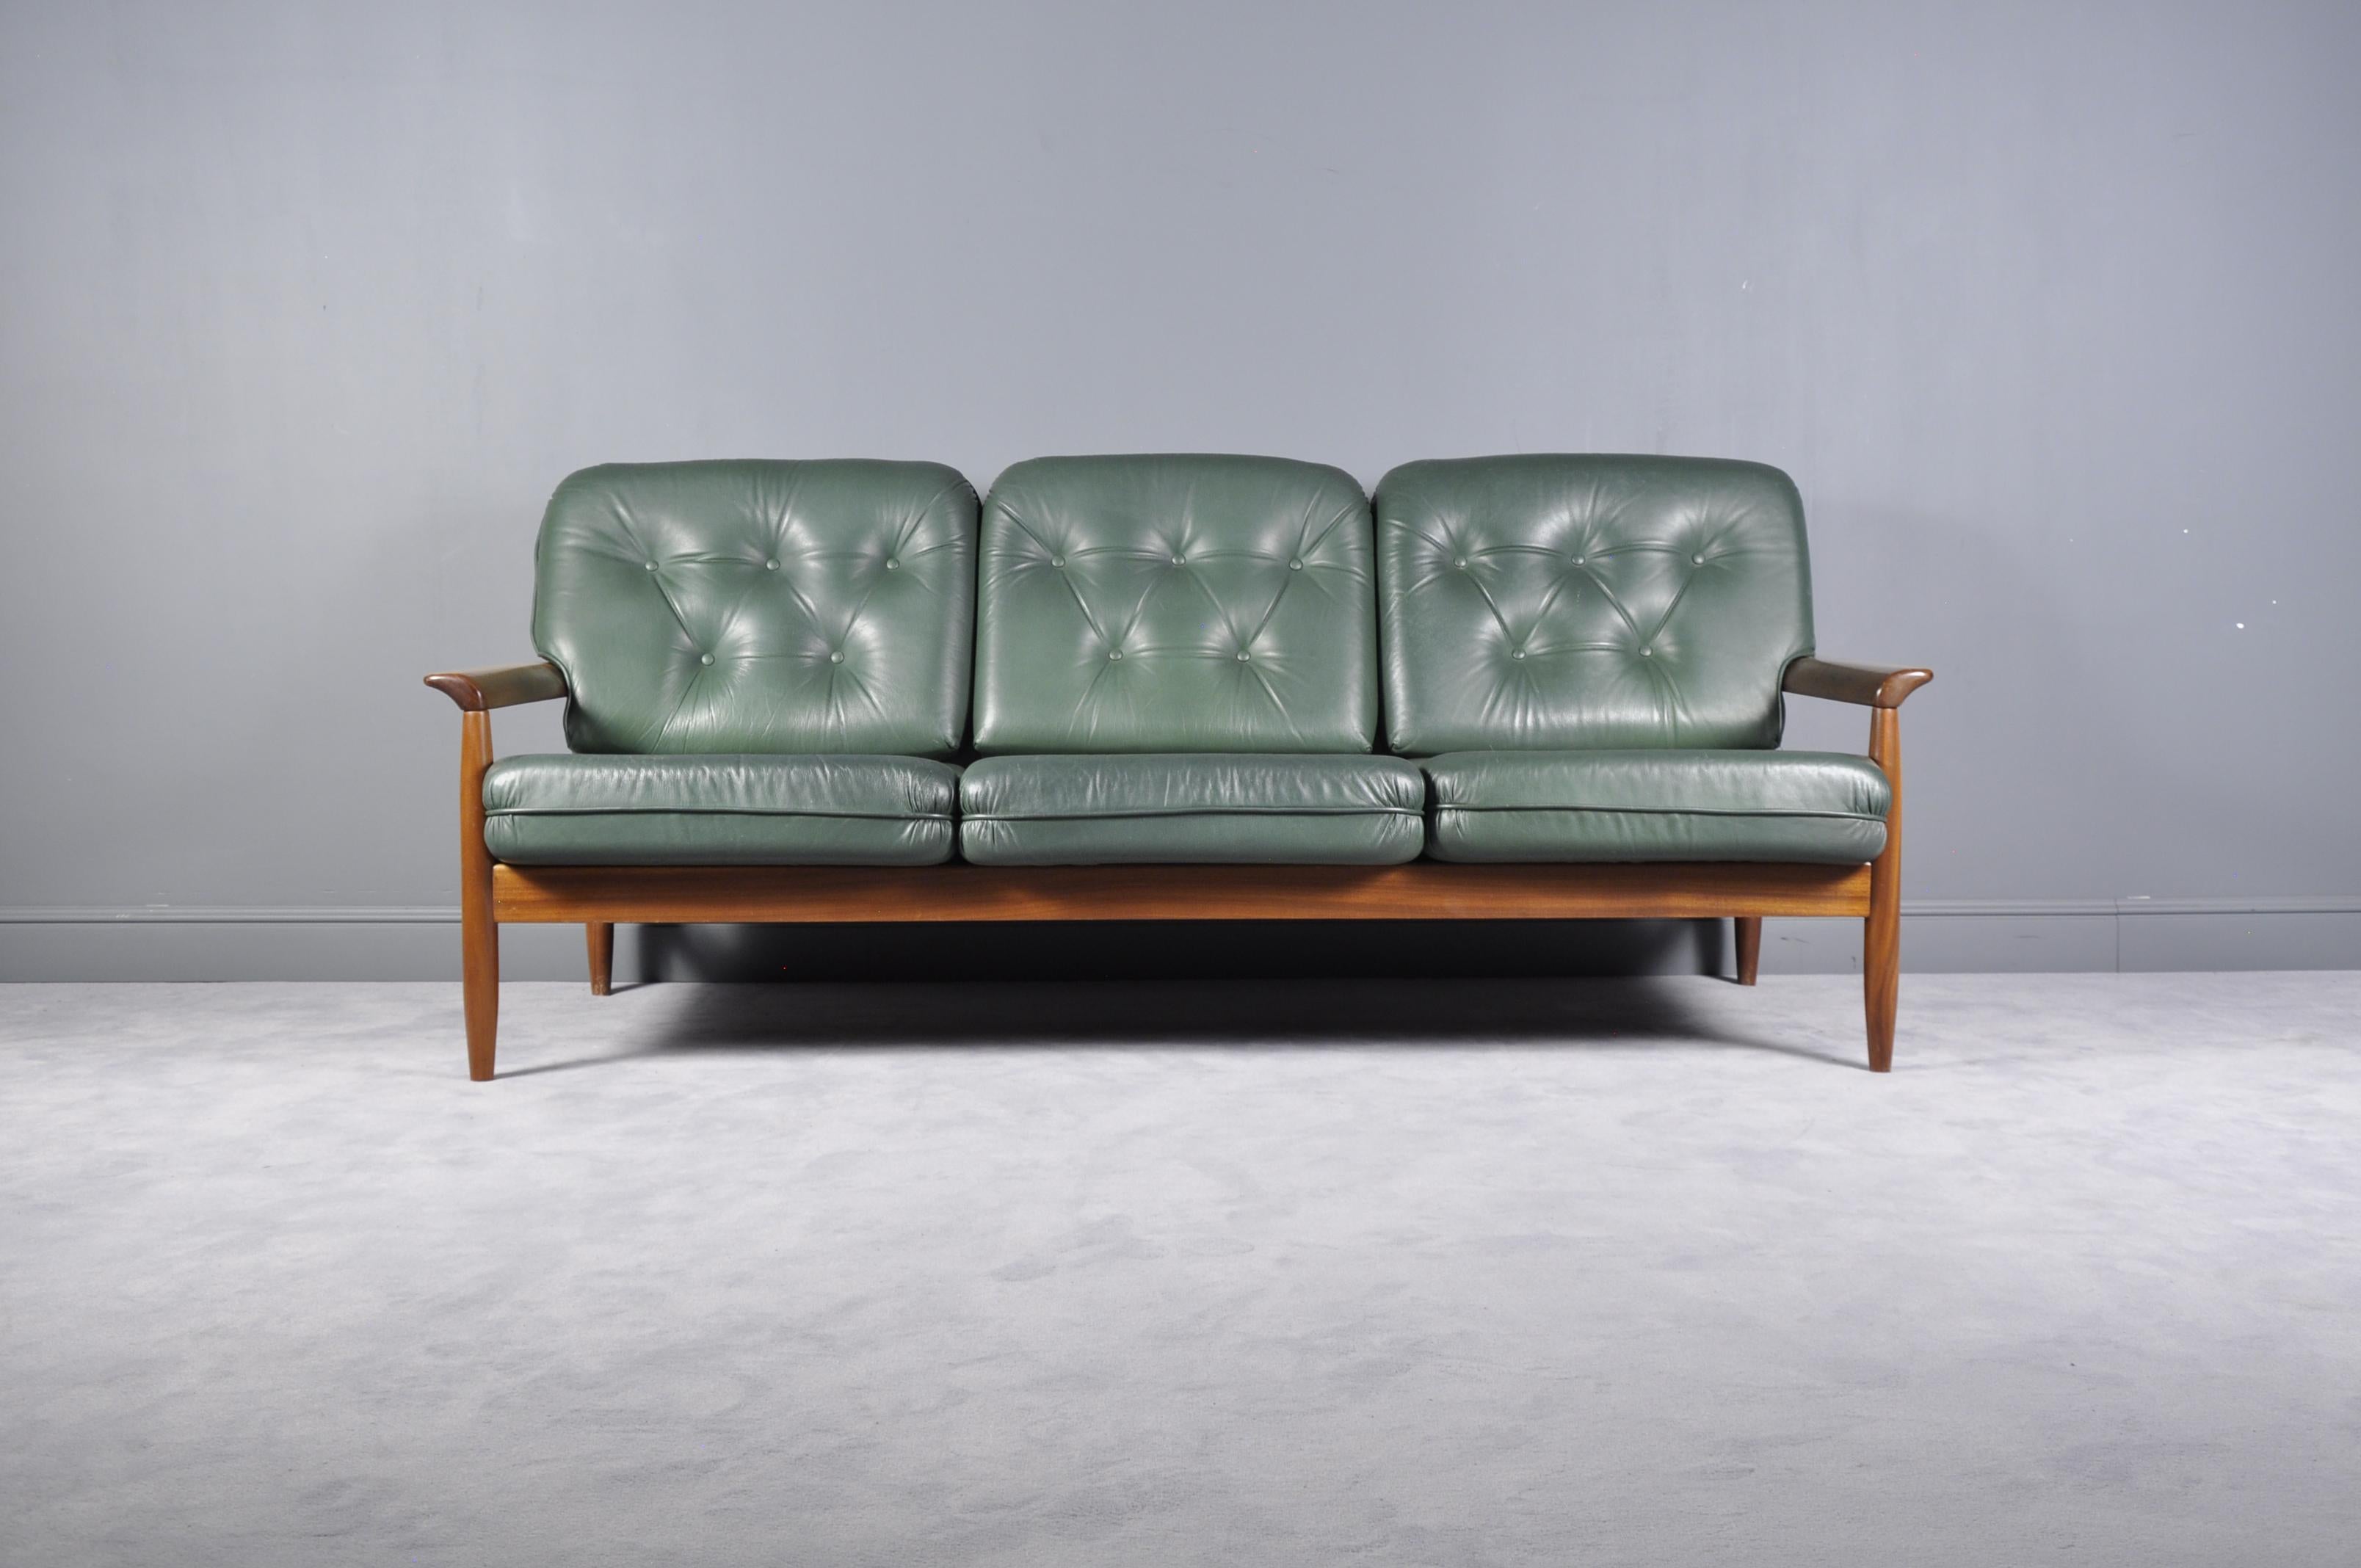 Mid-Century Modern soft green leather Scandinavian sofa set, produced in the 1960s in style of the Danish designer Arne Norell. The sofa set features an teak wooden base and green leather upholstery which is in an overall good condition. The